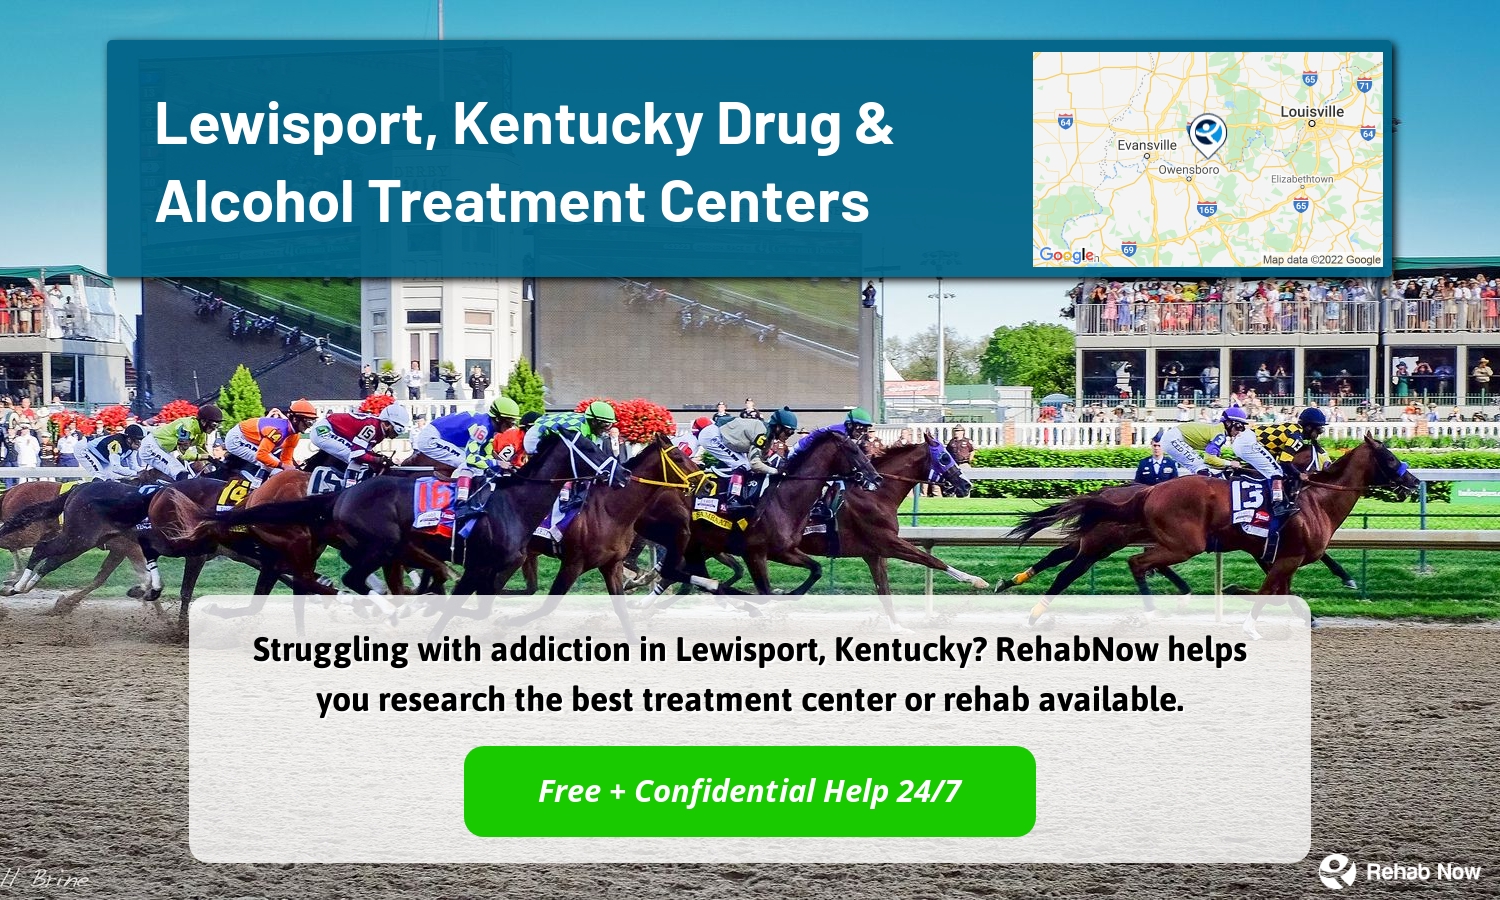 Struggling with addiction in Lewisport, Kentucky? RehabNow helps you research the best treatment center or rehab available.